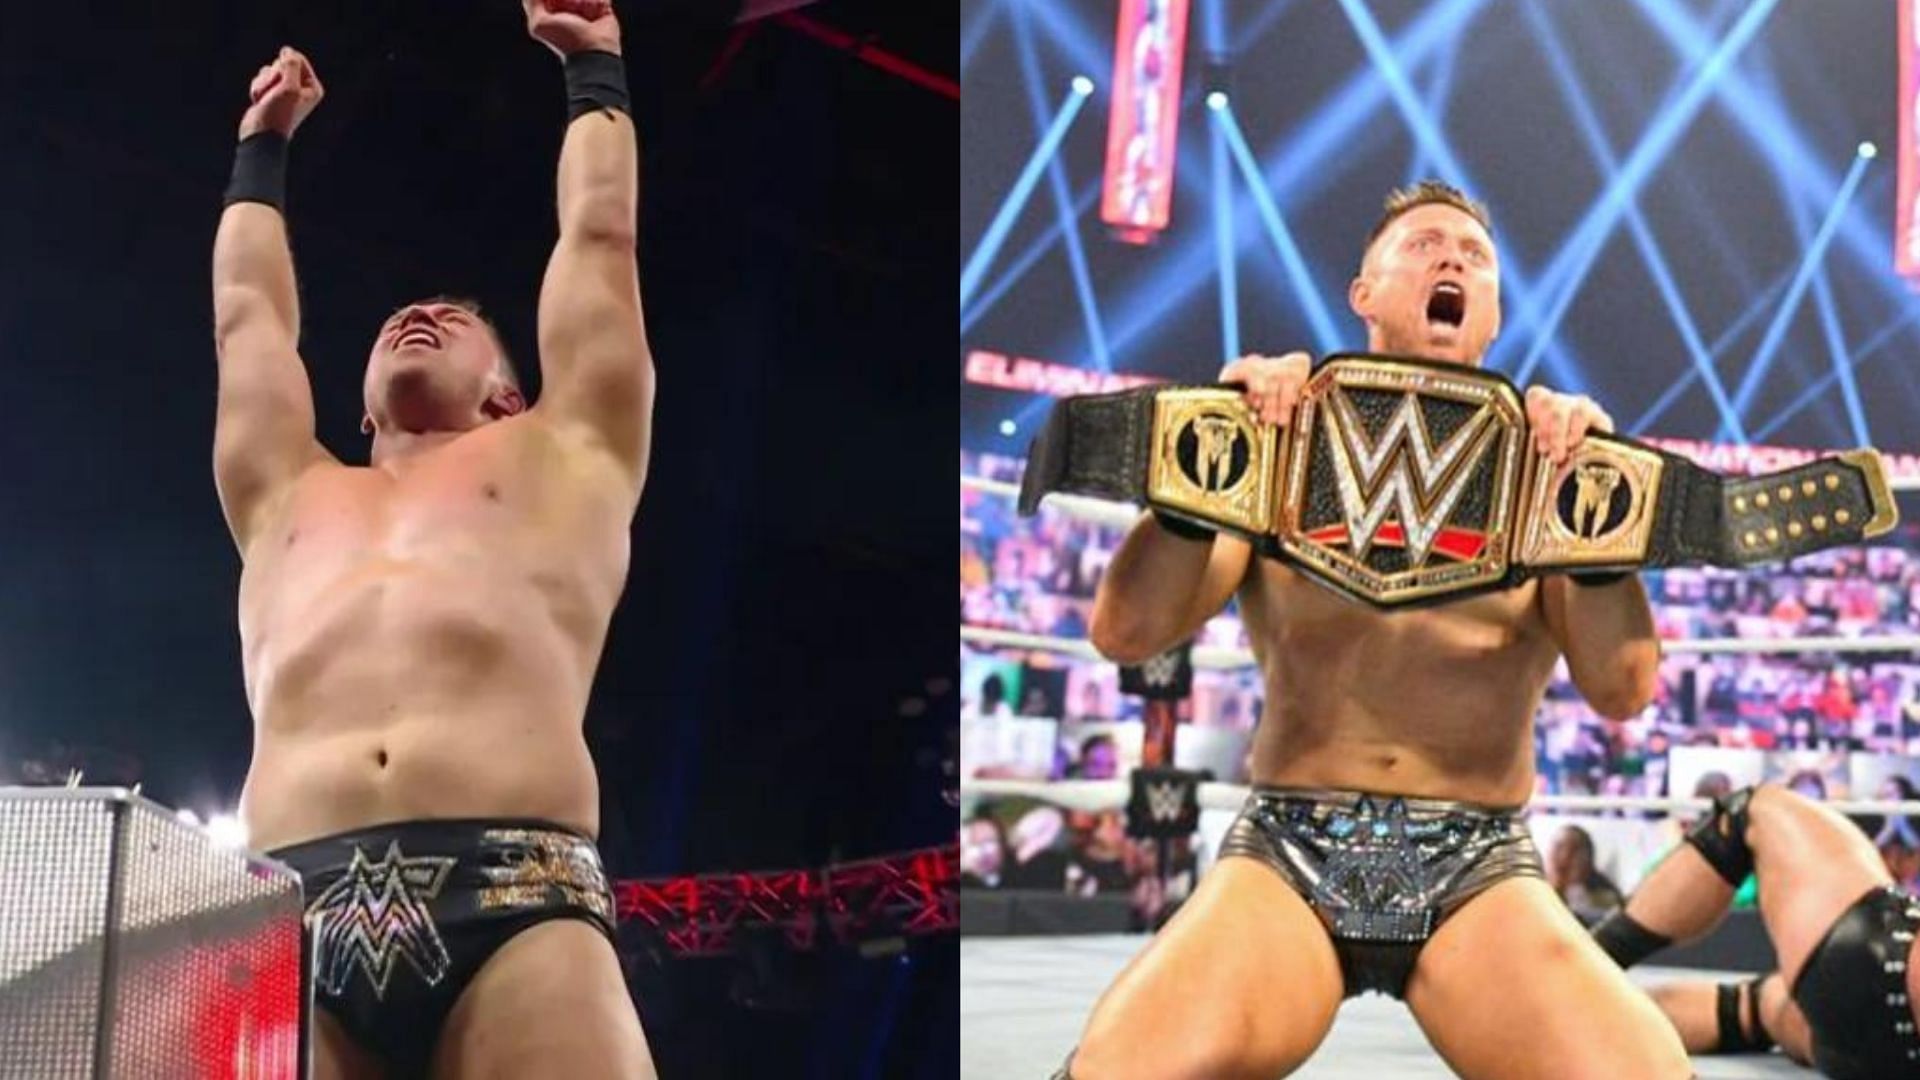 The Miz gets destroyed by 39-year-old WWE Superstar after a controversial win on RAW